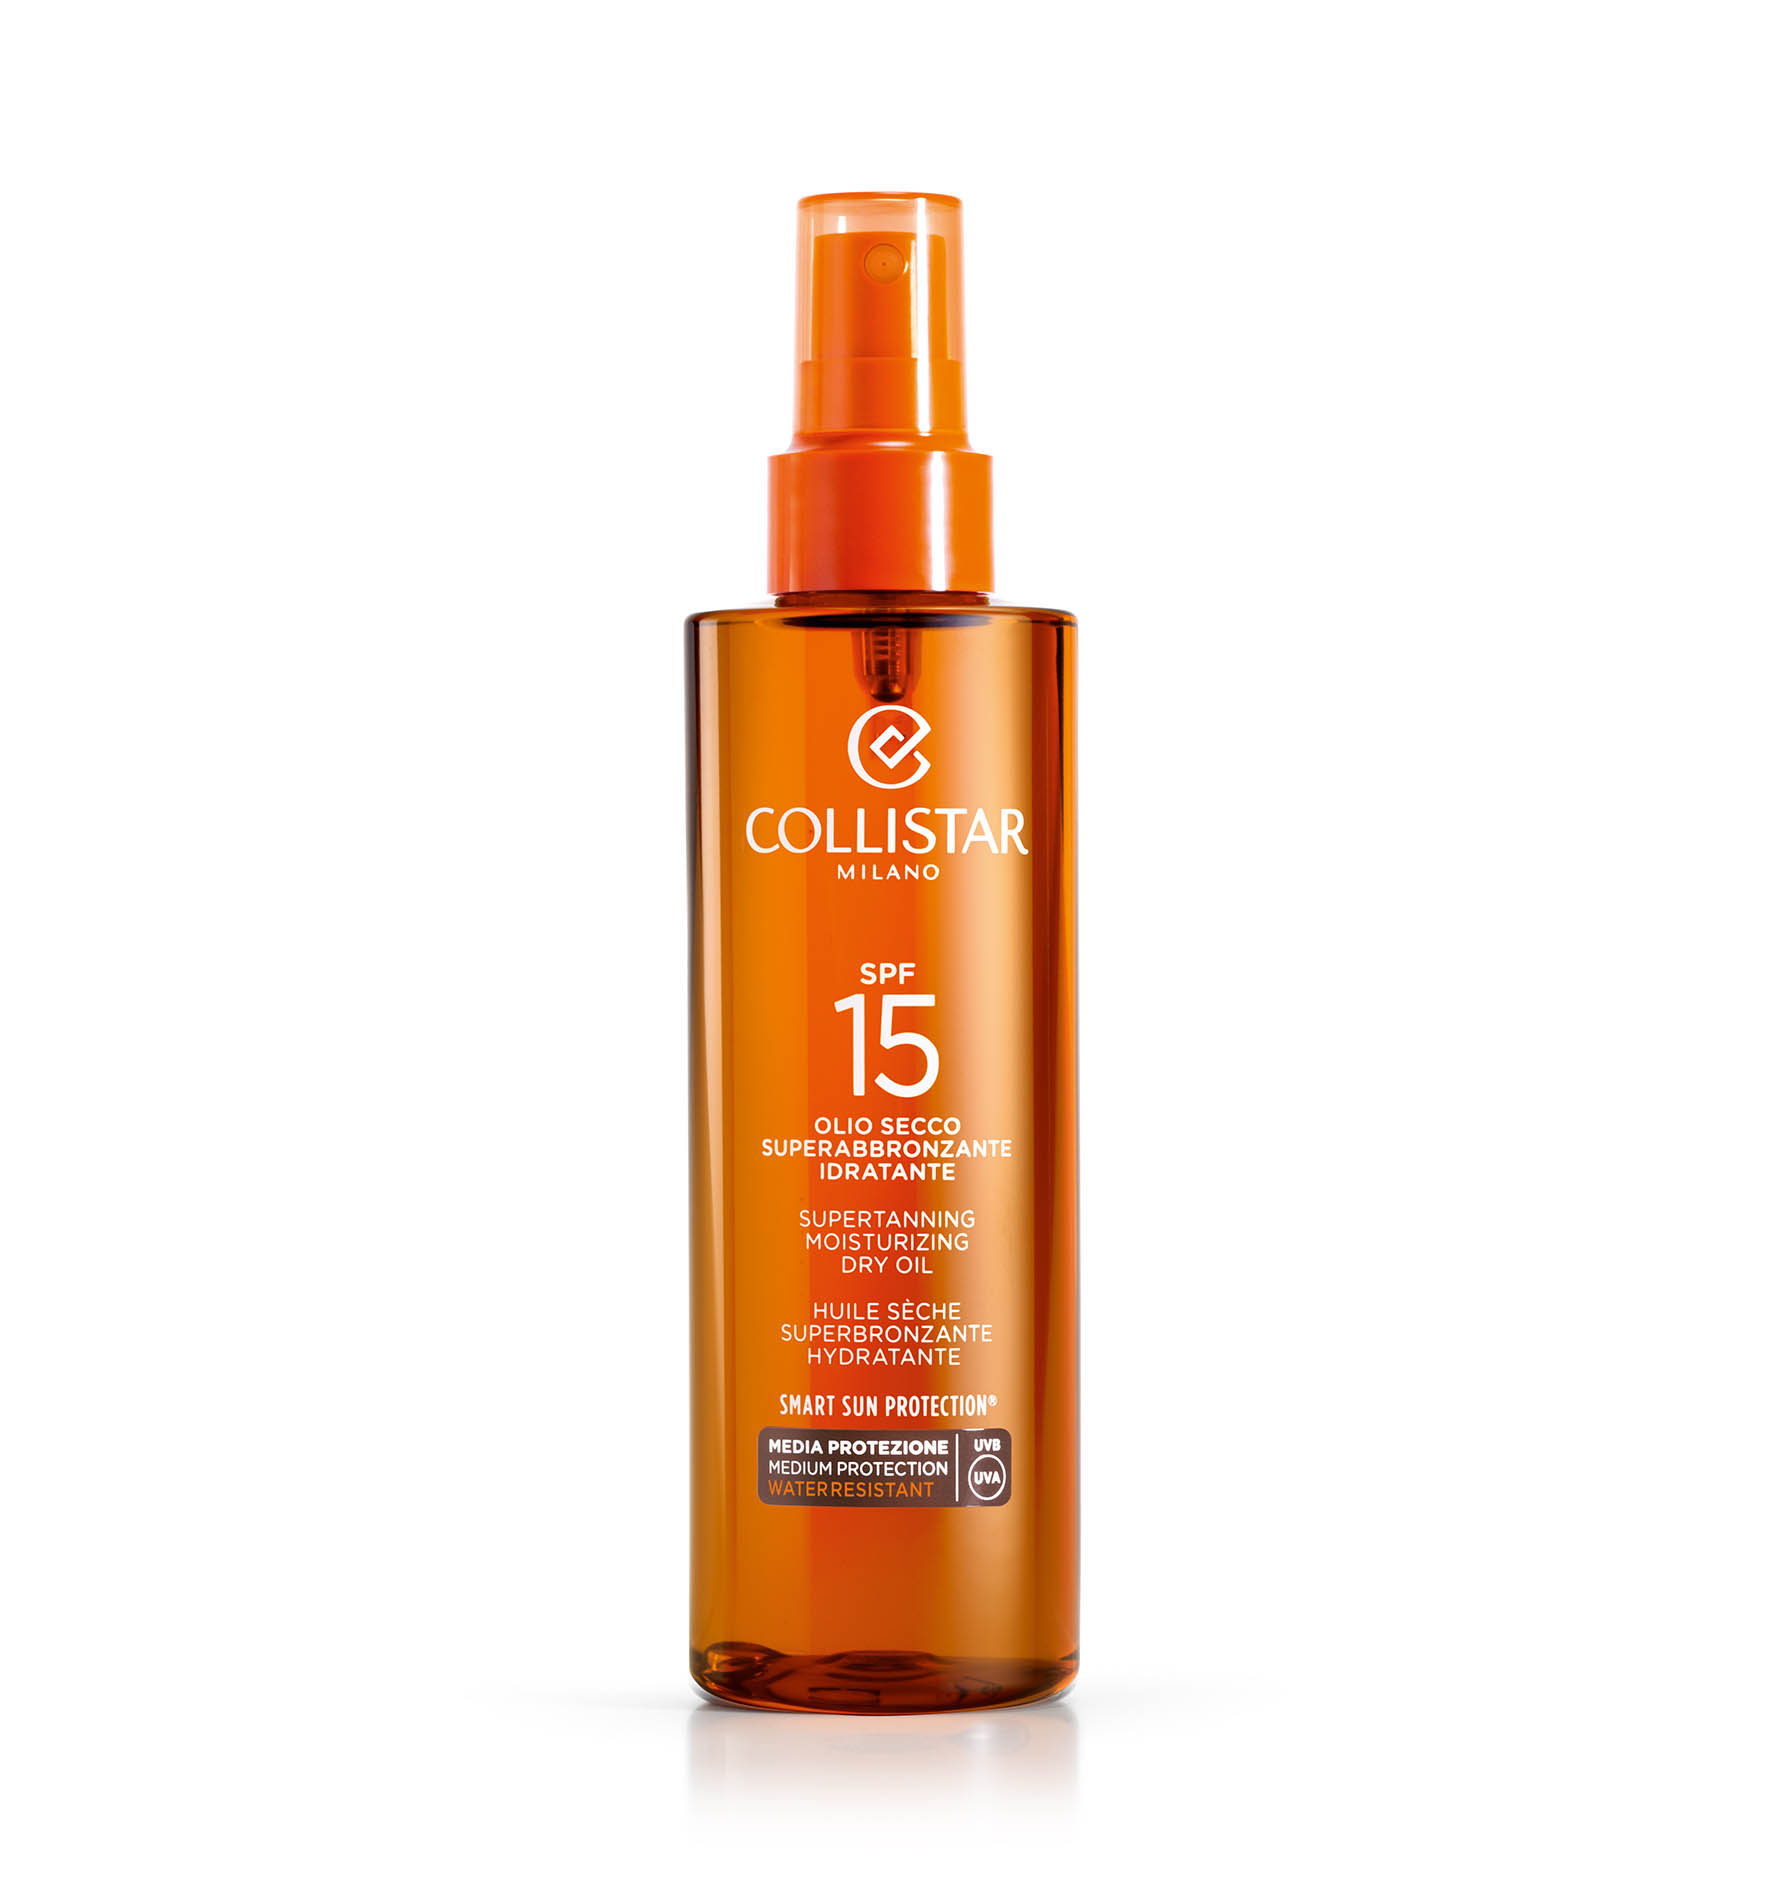 SUPERTANNING DRY OIL SPF 15 - Tanning oil | Collistar - Shop Online Ufficiale